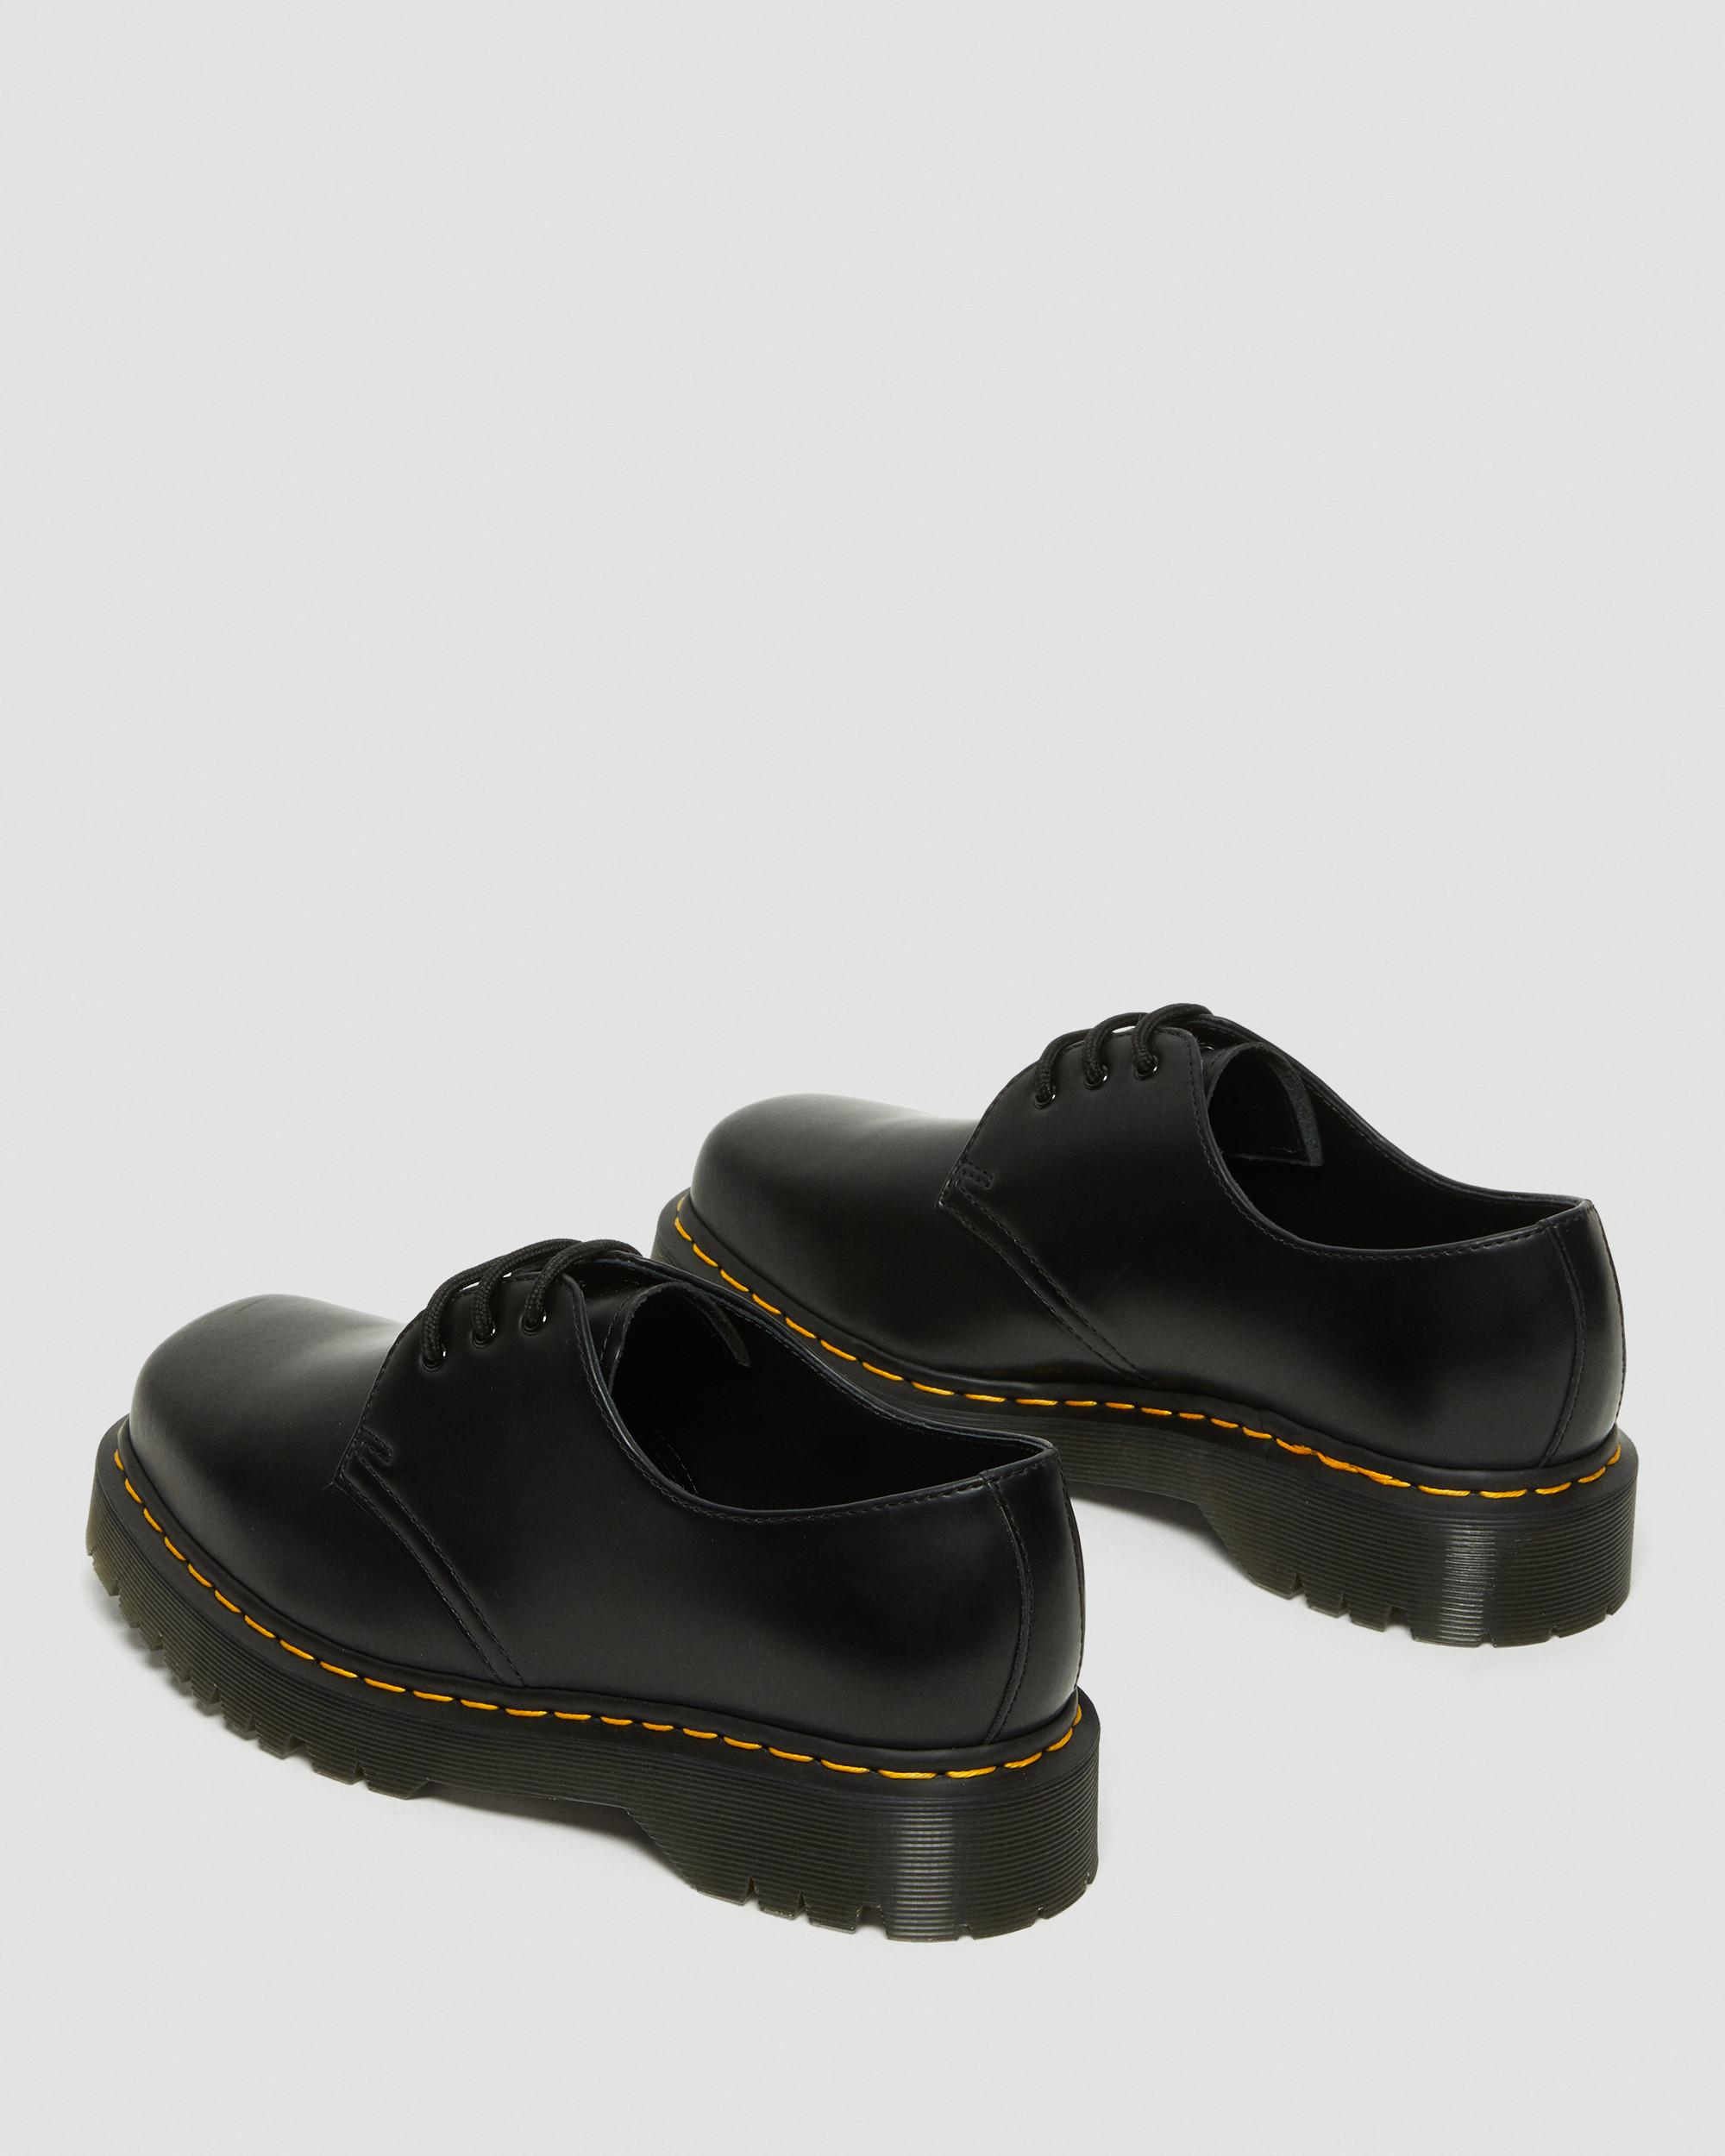 1461 Bex Squared Toe Leather Shoes in Black